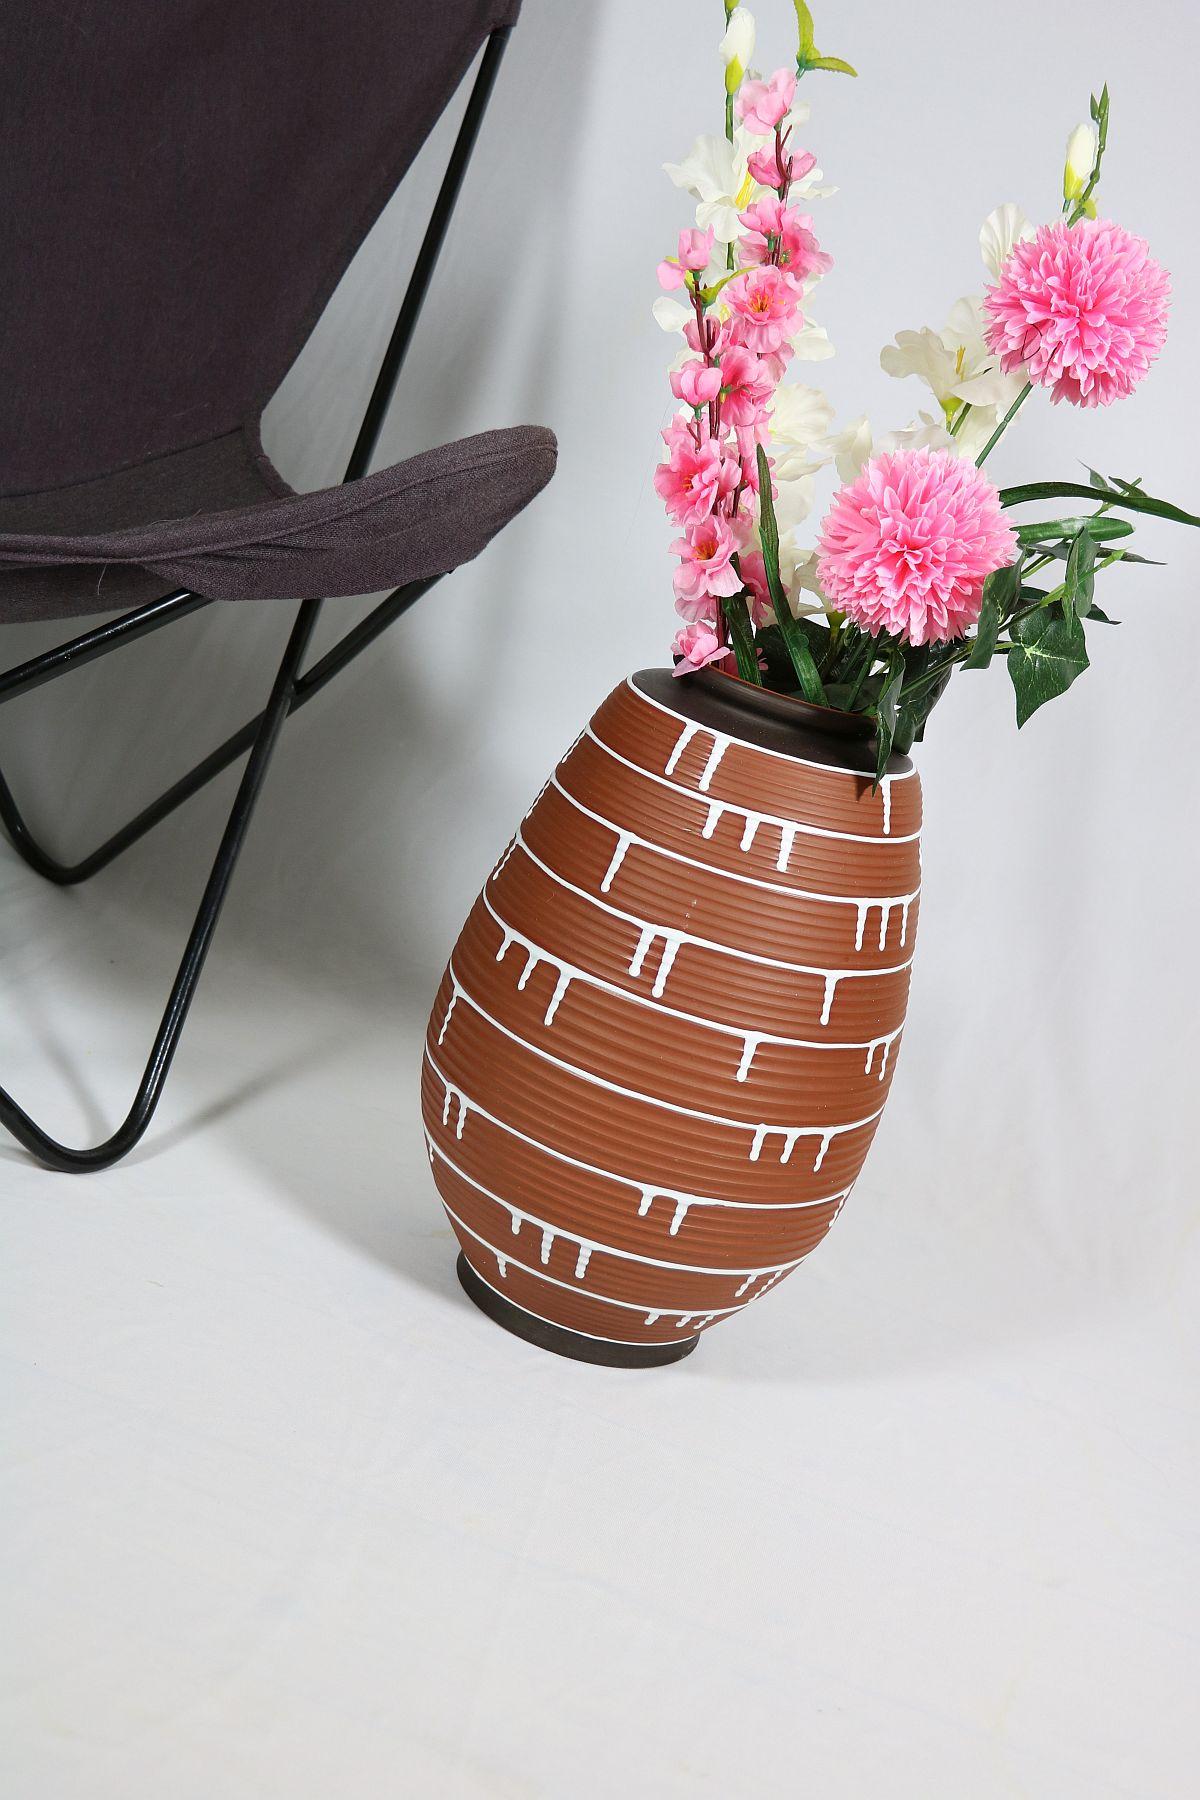 Beautiful pottery vase from Germany.
Manufacturer: Ilkra
Earth colors that goes with very much.

Handmade.

For large bouquets because 40 cm / 15.75 inch high.

Very well preserved